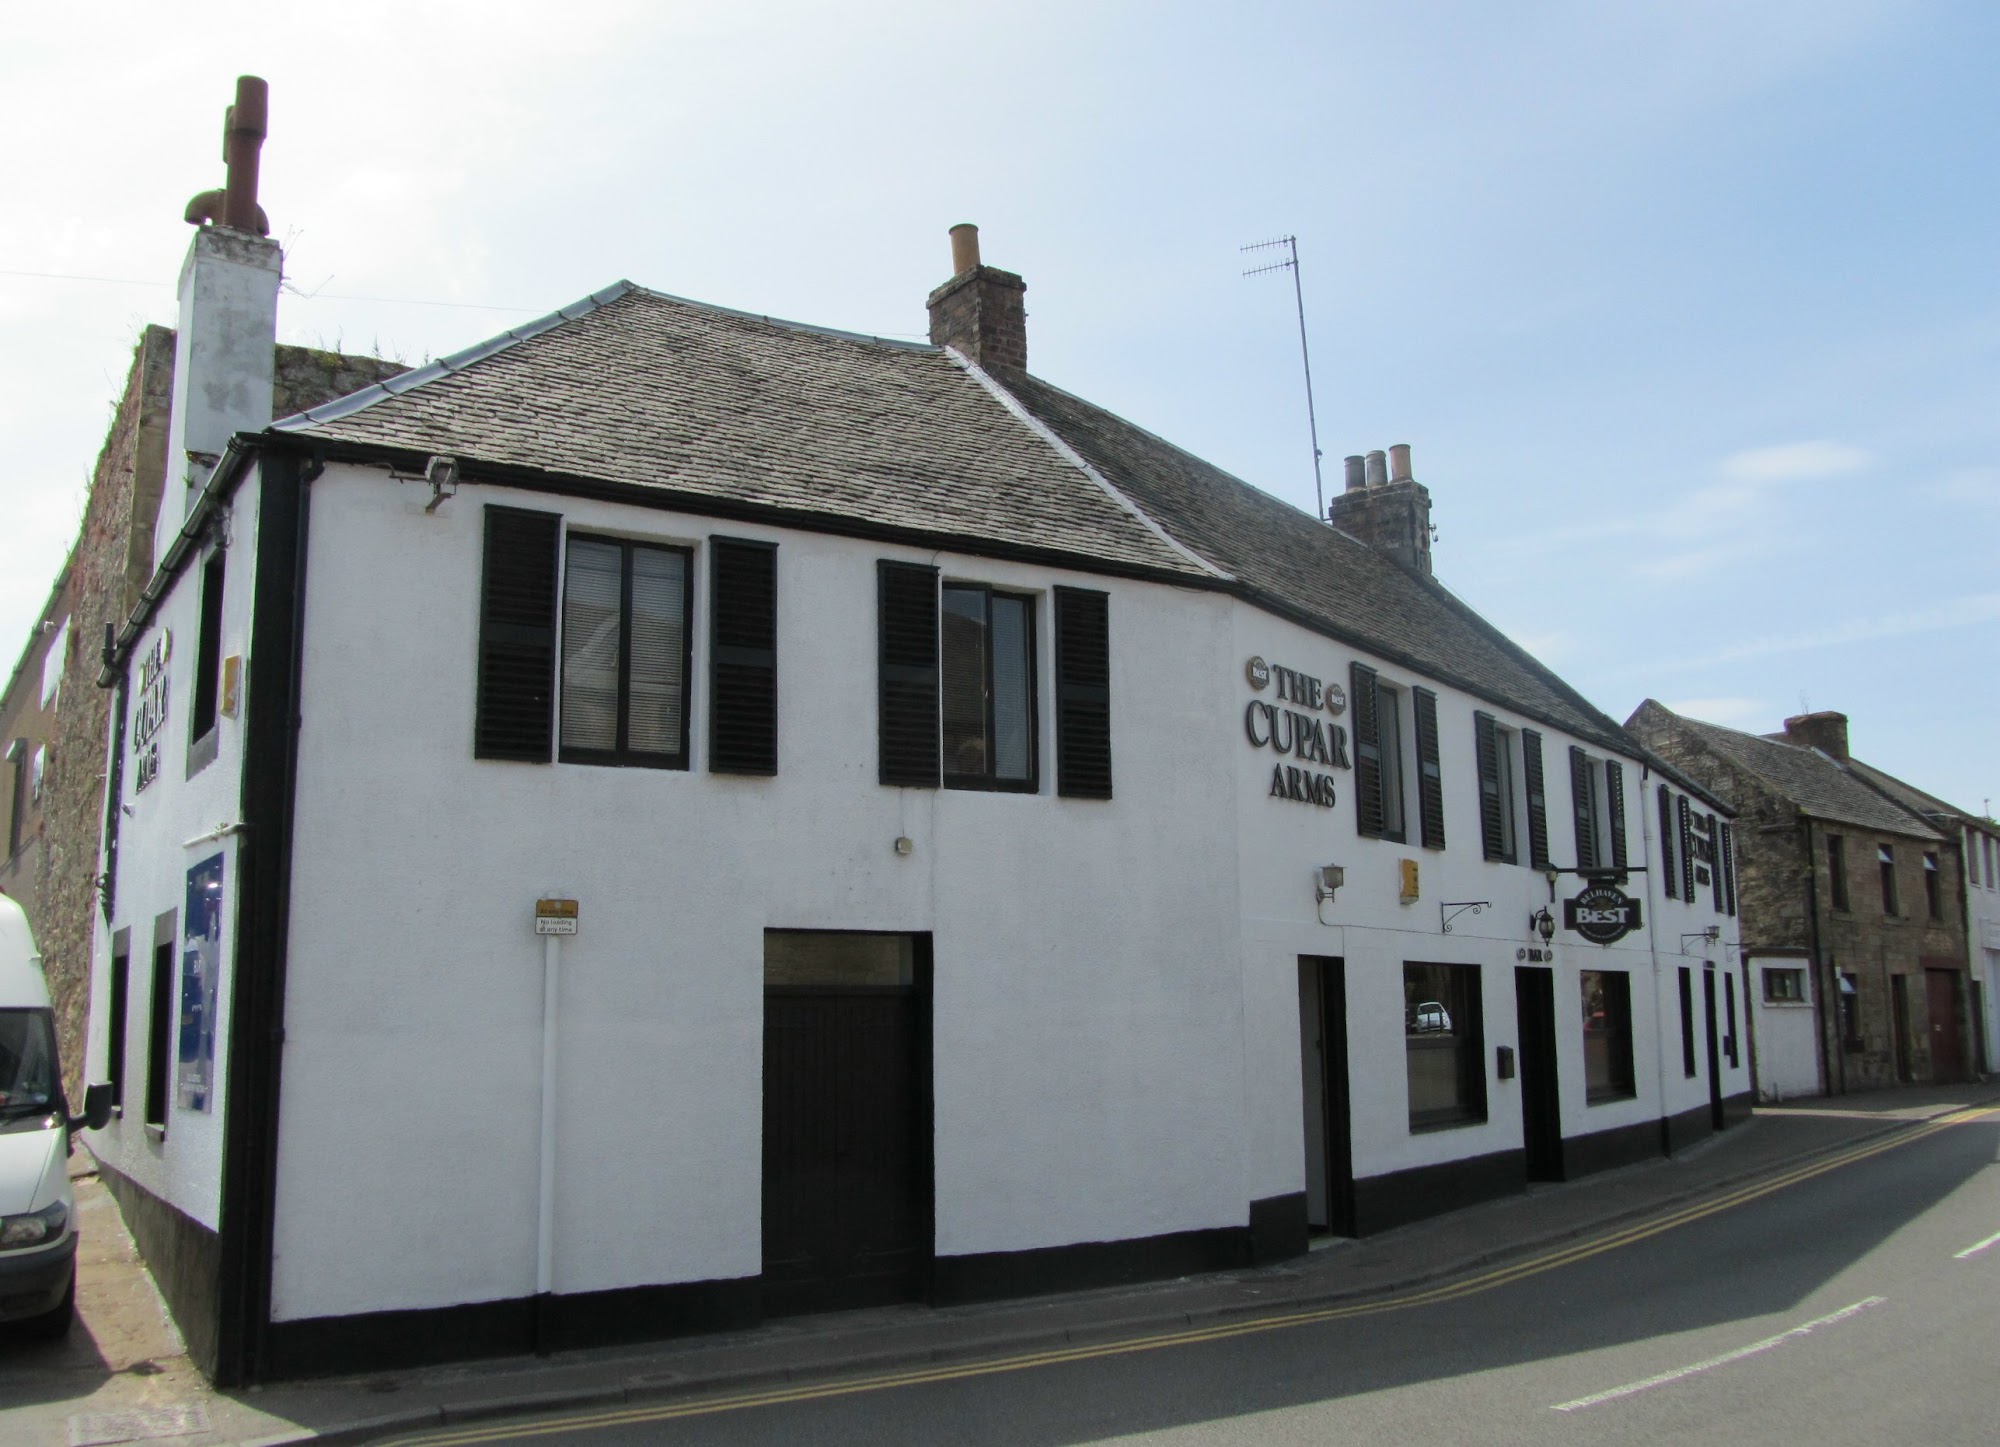 The Cupar Arms Hotel